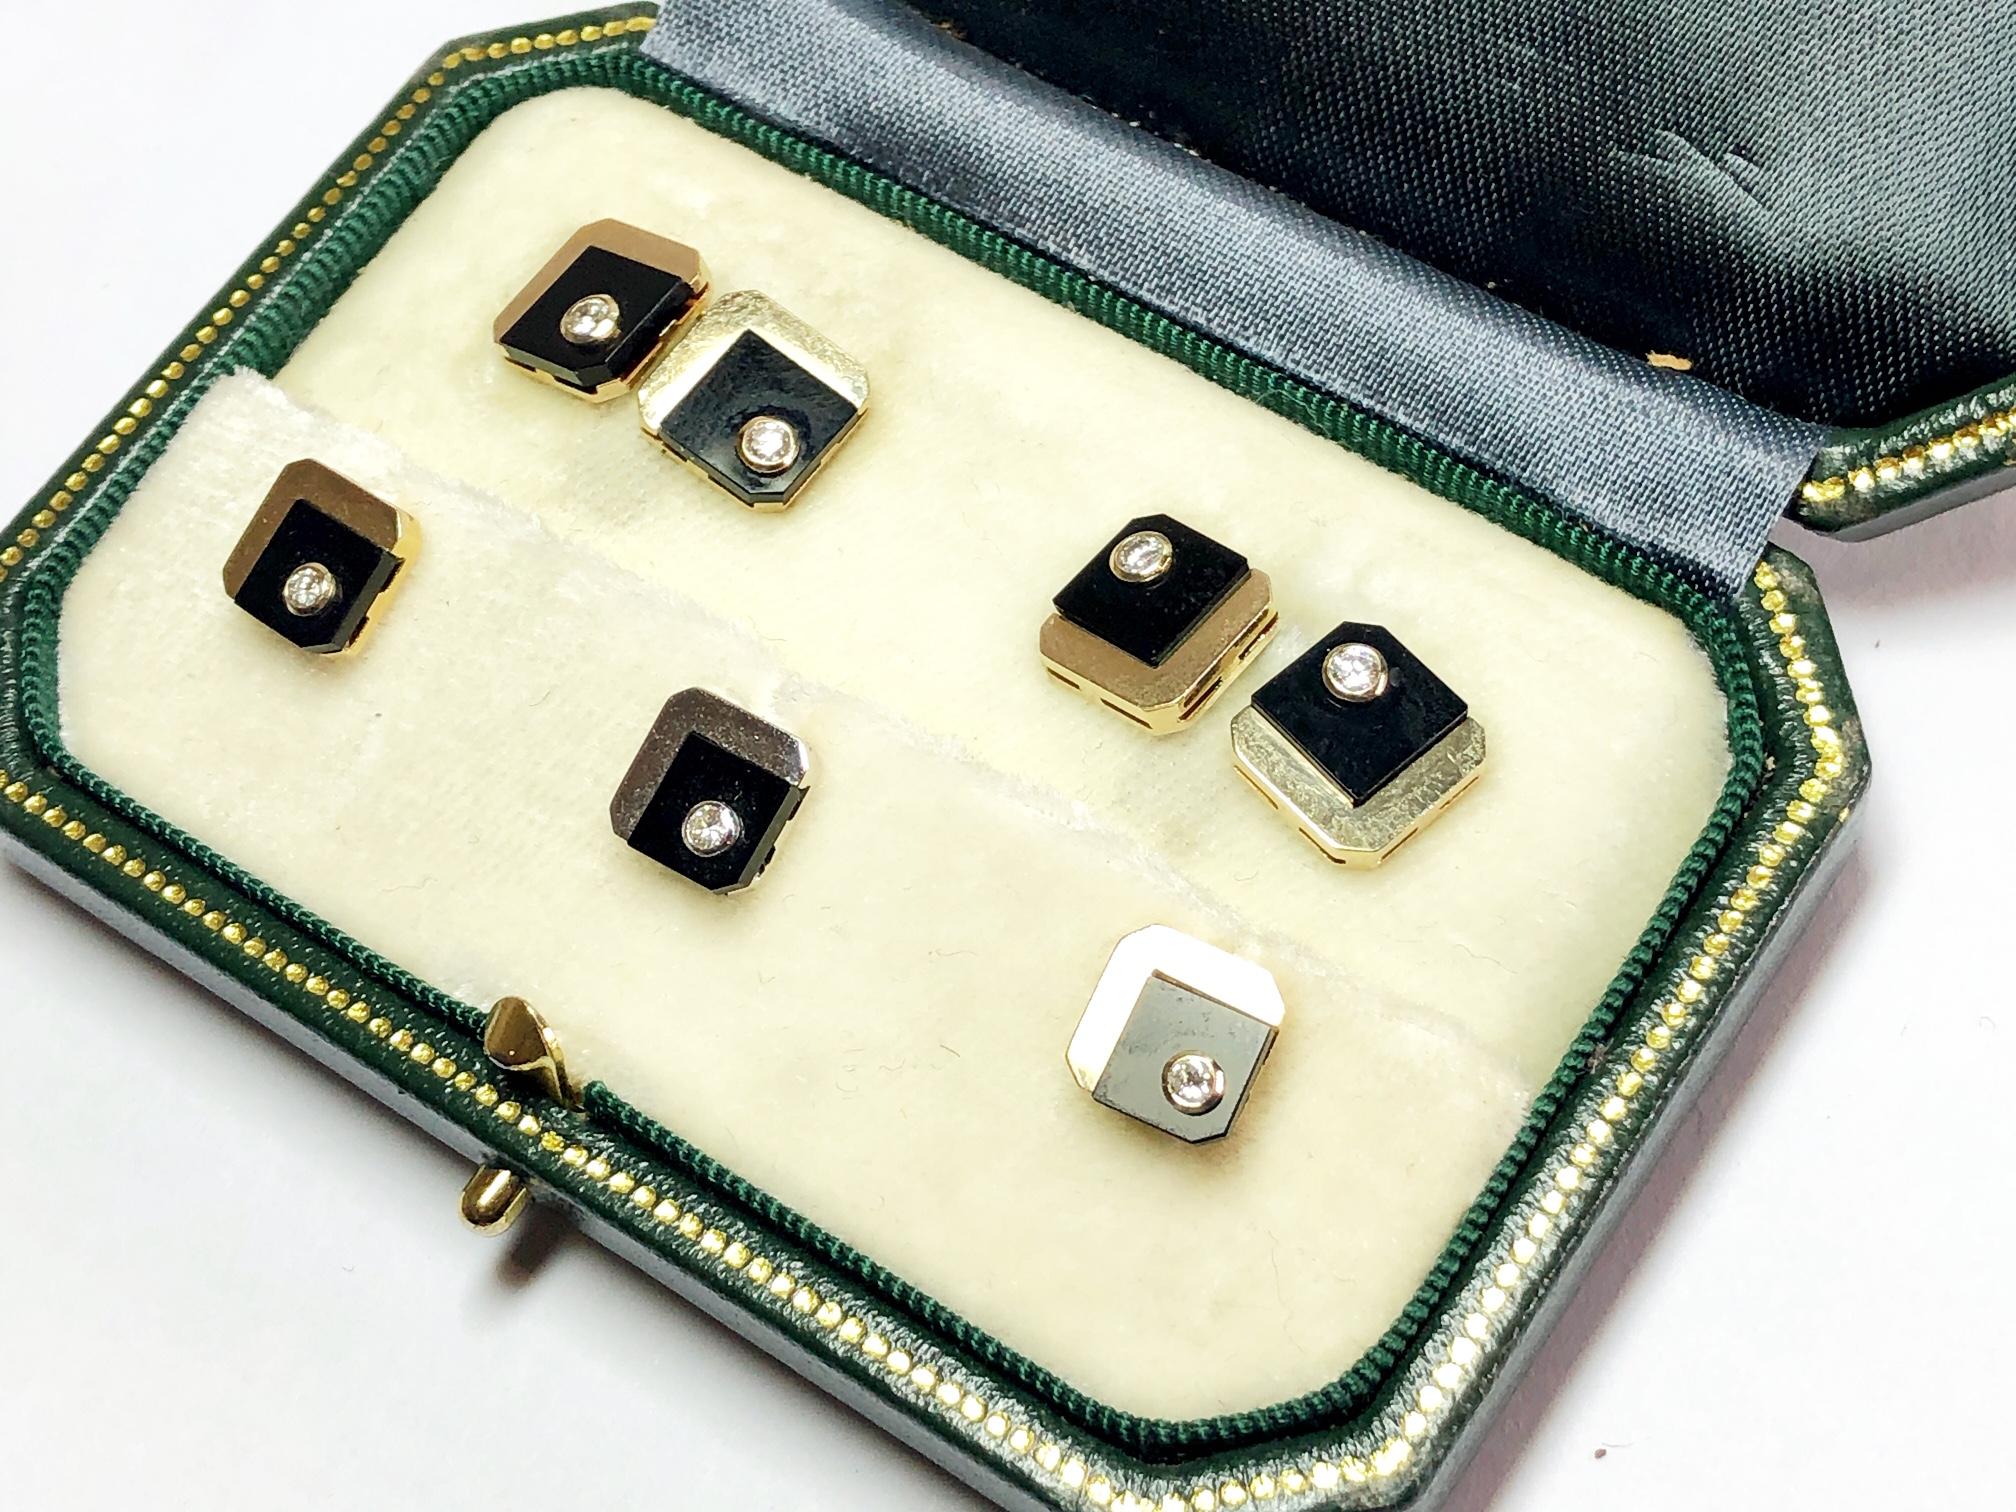 A black onyx and diamond dress set by Weingrill, mounted in 18ct yellow gold, set with black onyx and a diamond in each plate, in a square shape with cut corners. Signed Weingrill. Please note one stud has been plated white gold. Circa 1960.